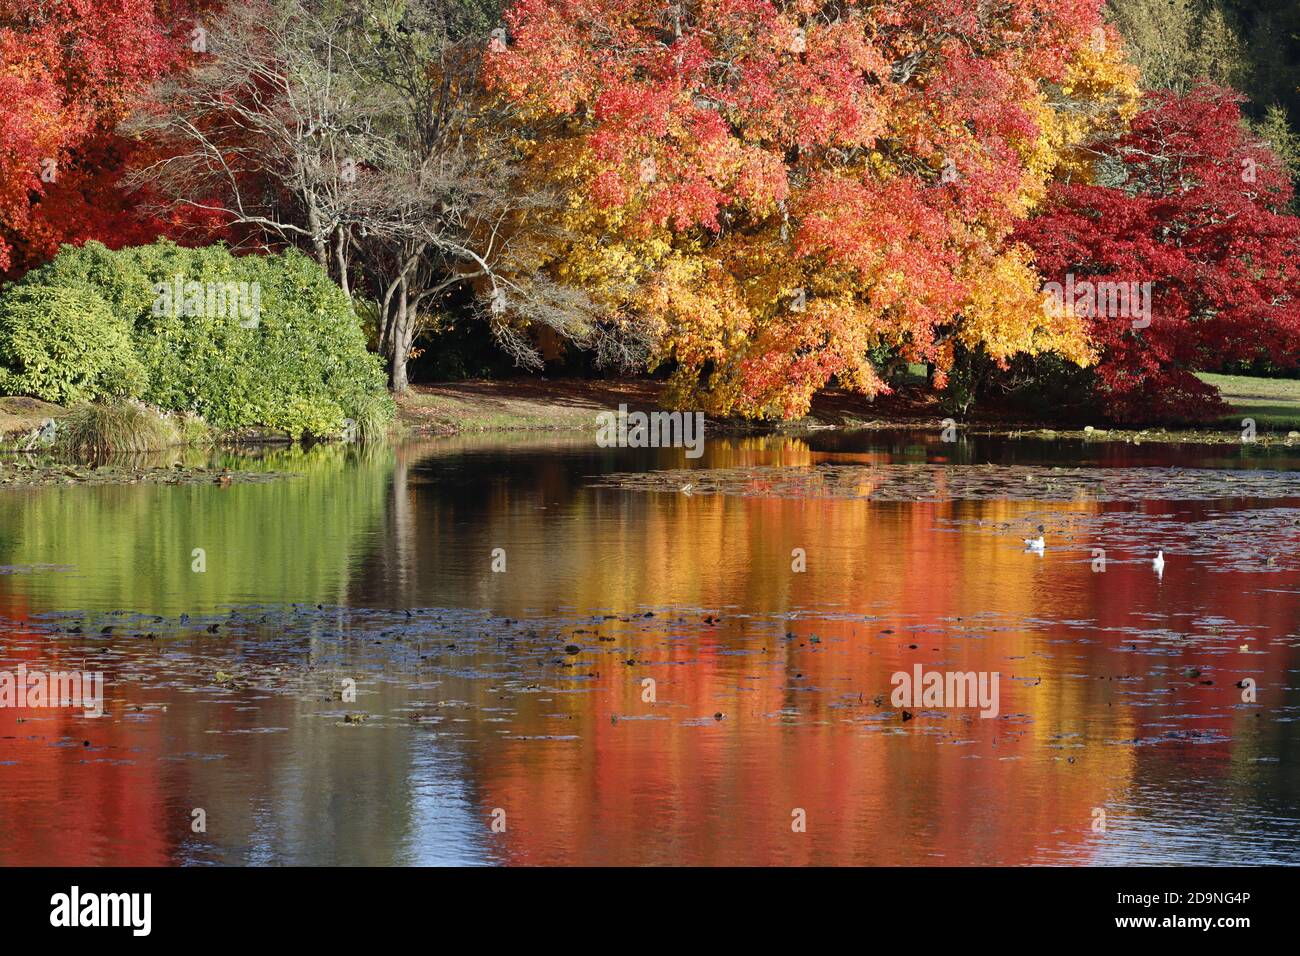 Autumn colours reflected in lakeside setting Stock Photo